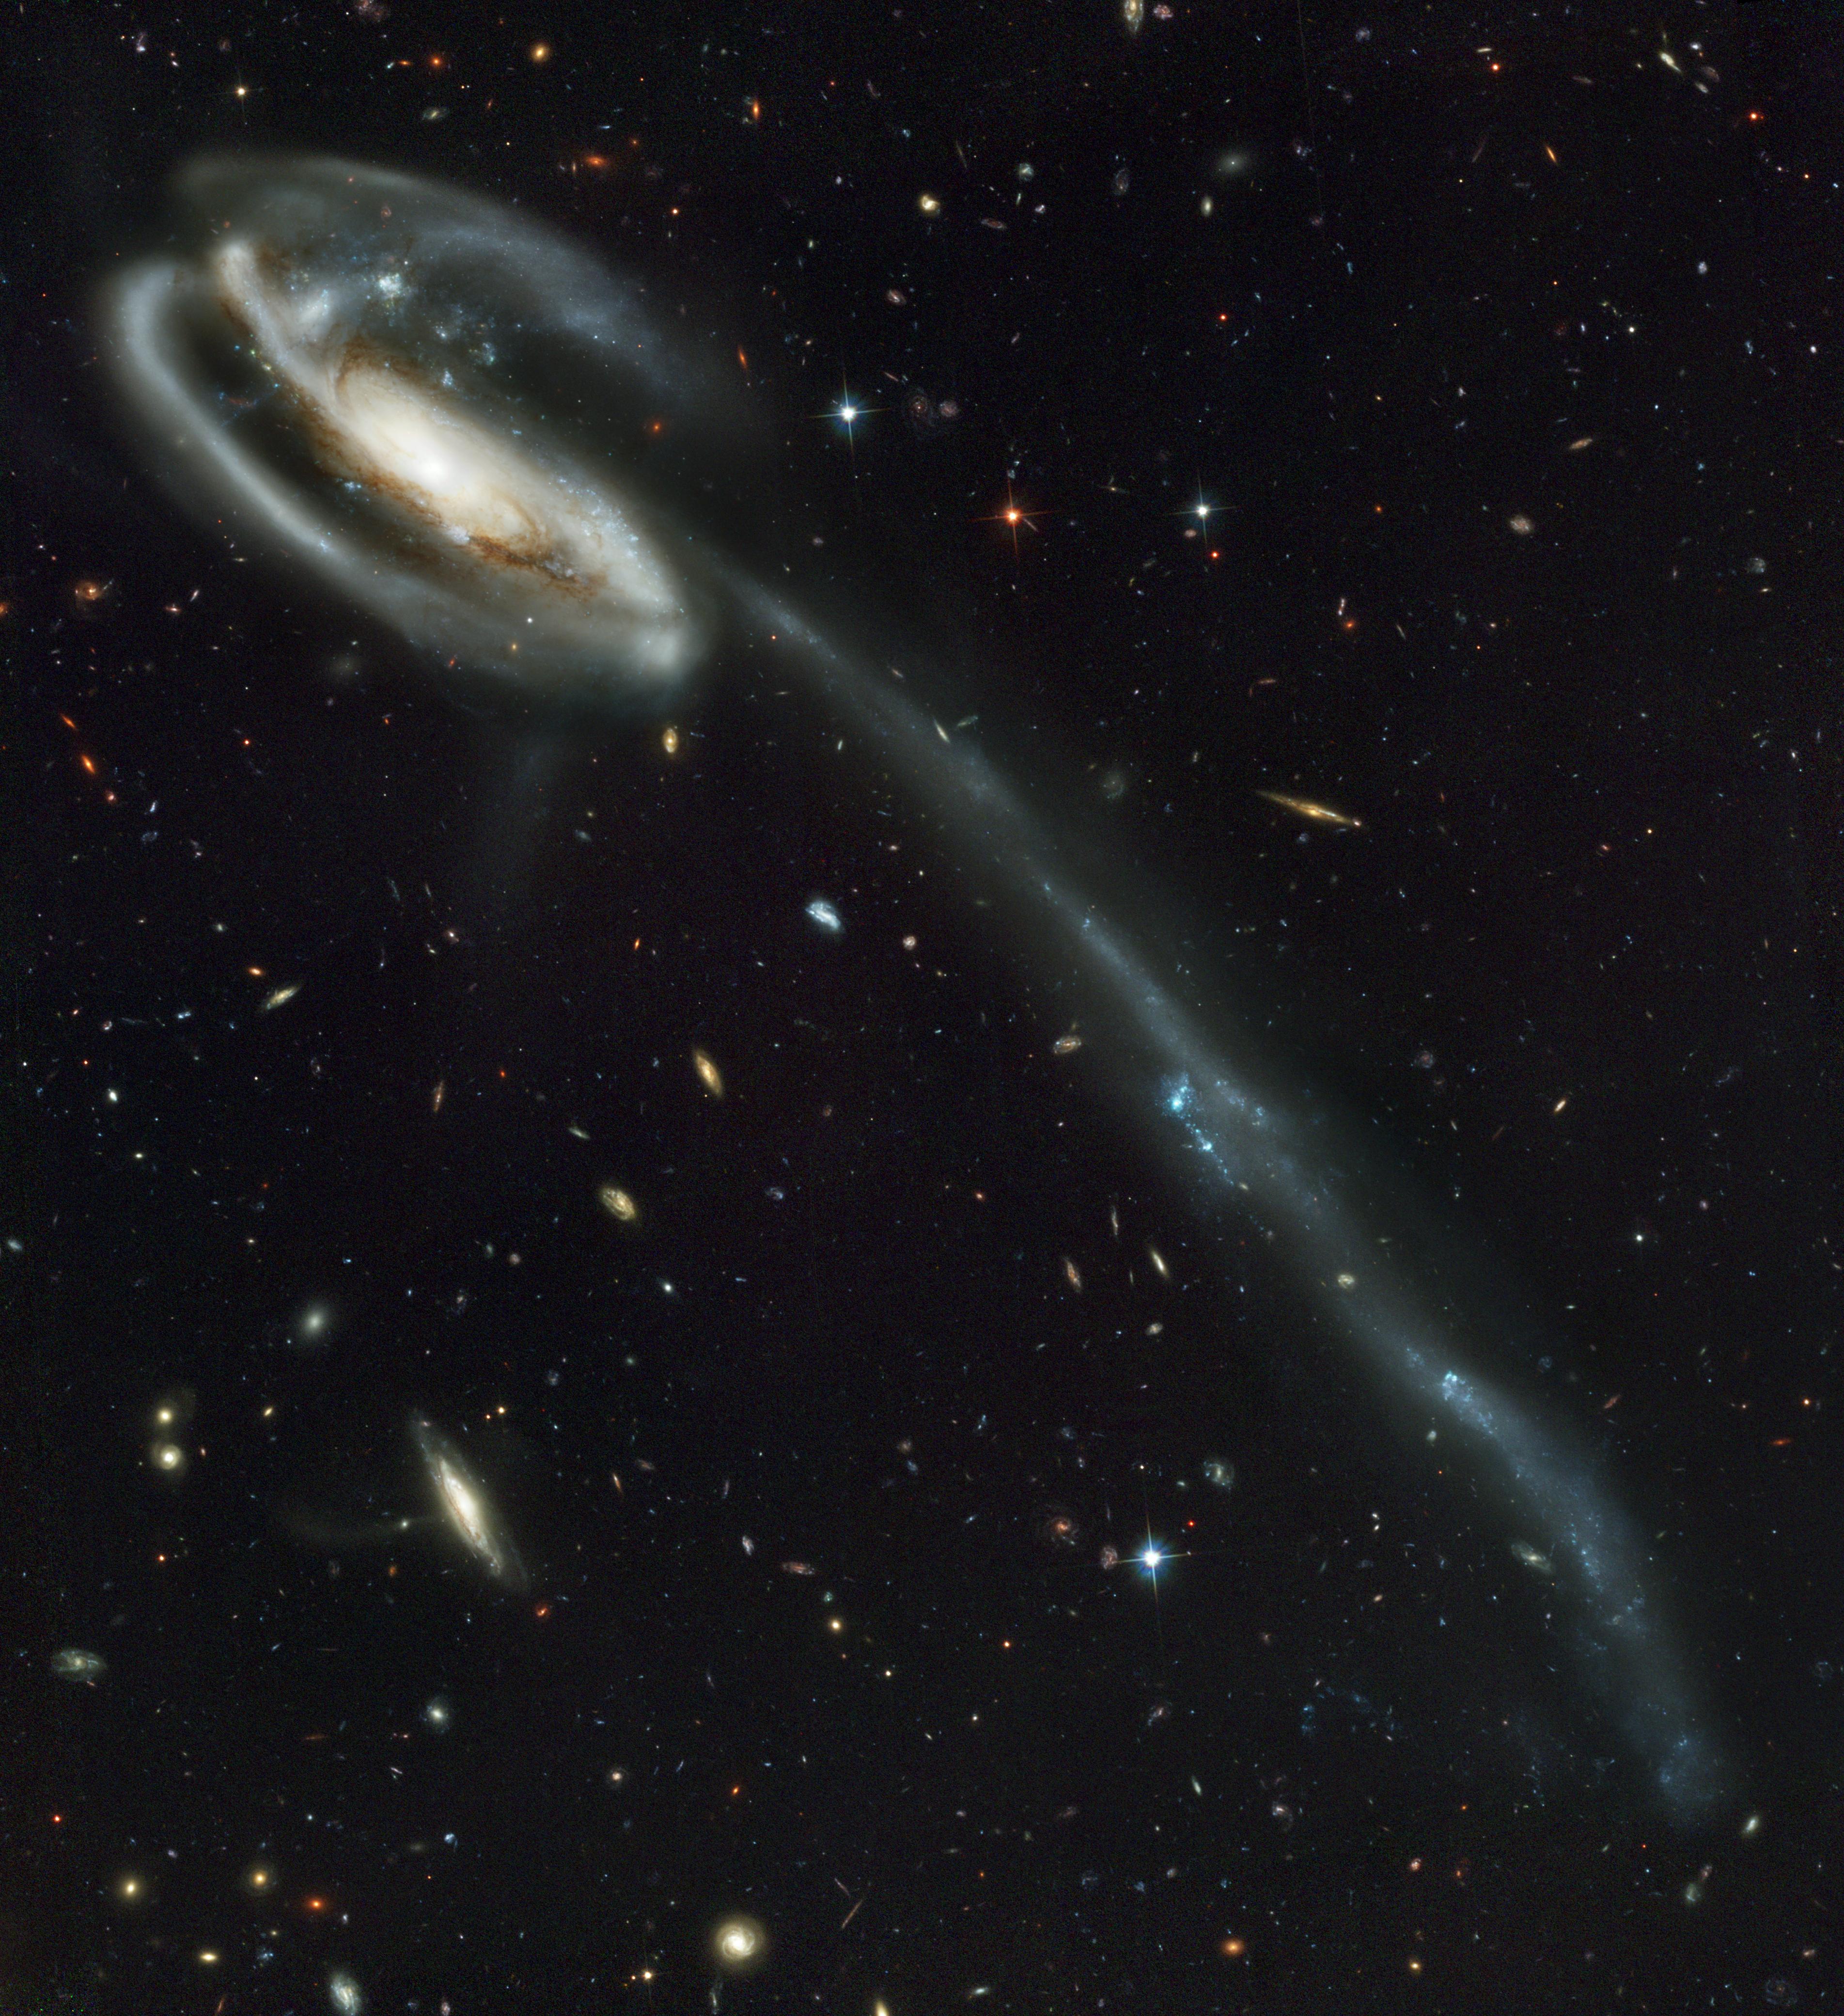 At the top left of the image, a white spiral galaxy is seen with a long blue tail going diagonal down to the bottom right. In the background there are many distant galaxies.